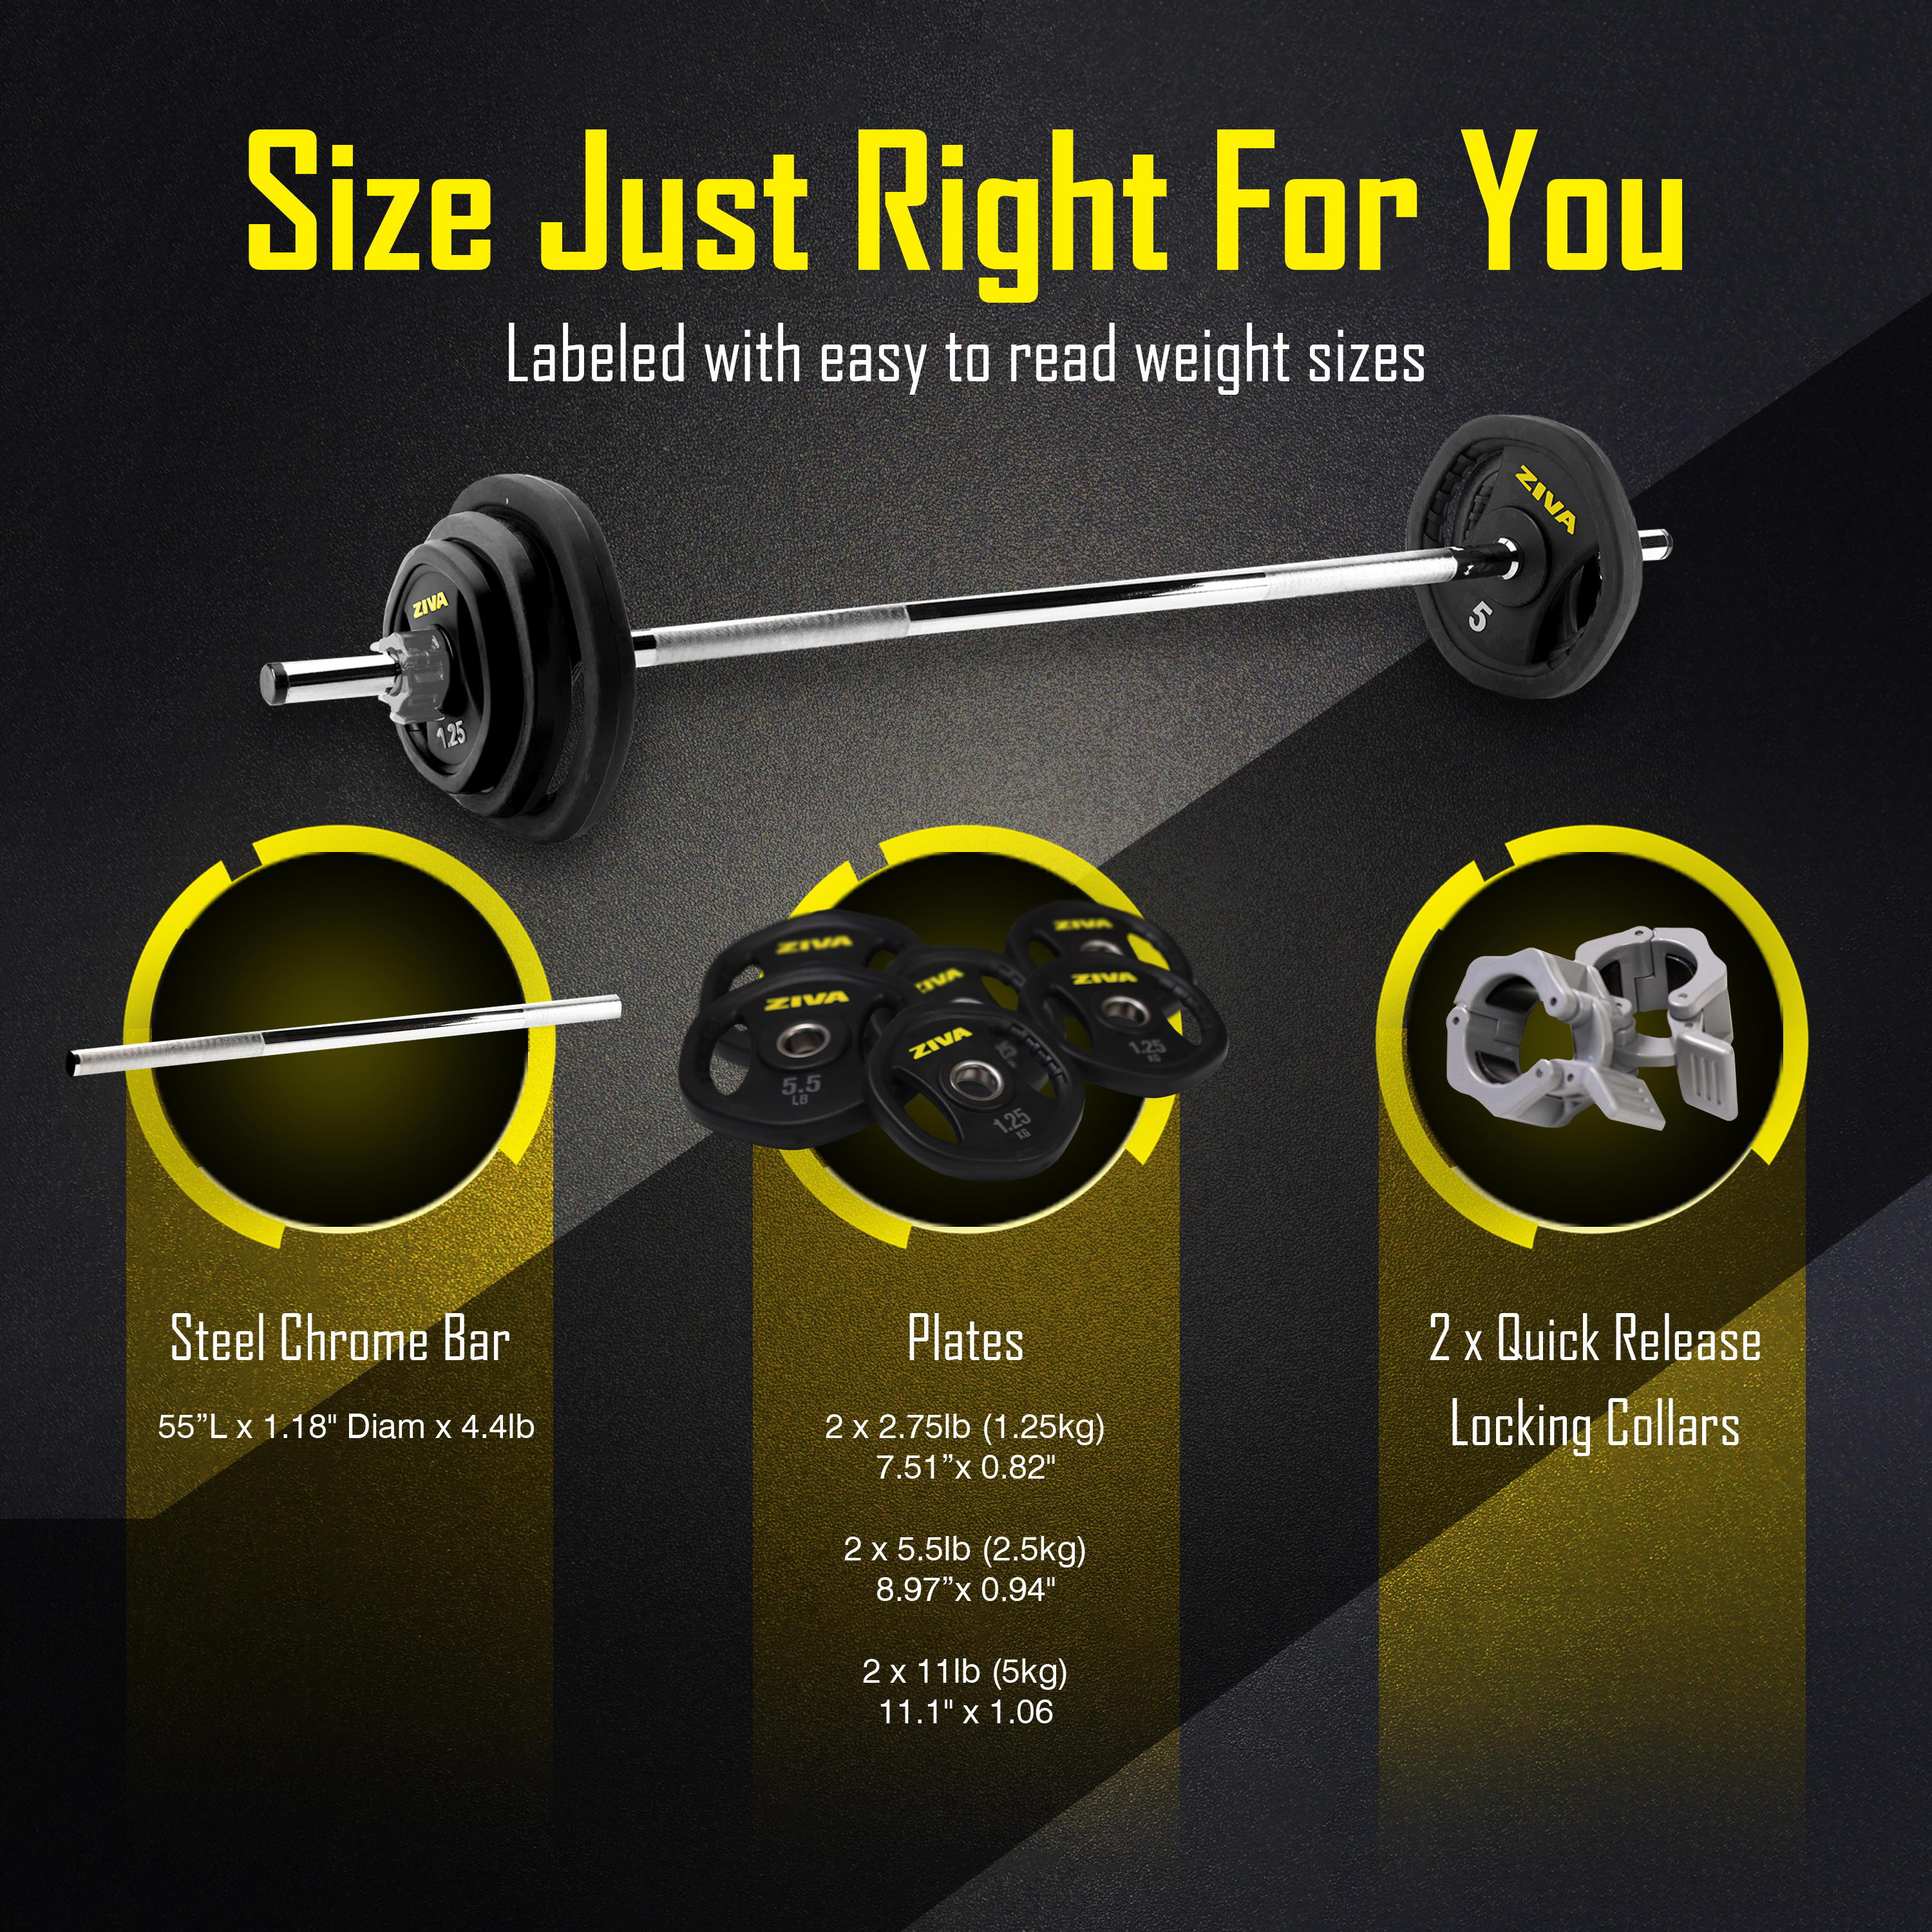 Size just right for you. Labeled with easy to read weight sizes. Steel chrome bar, plates, 2x quick release locking collars.